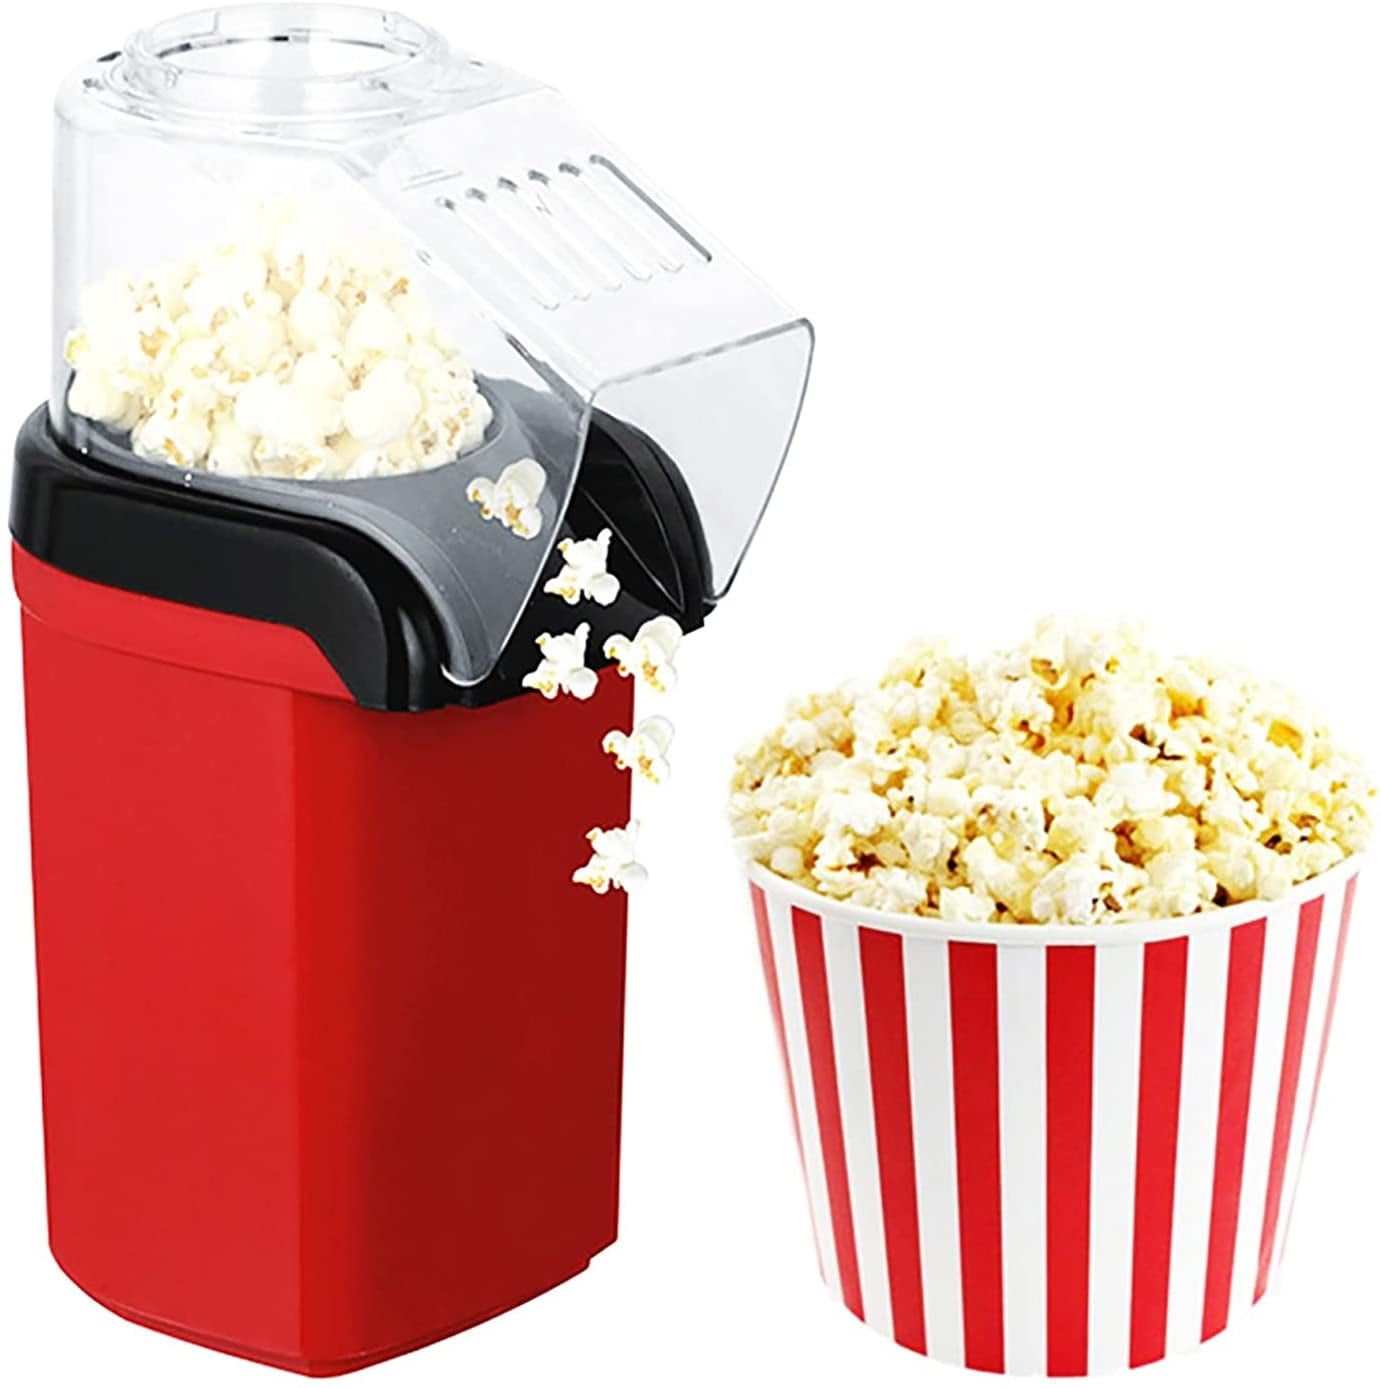 16Cups Electric Air Pop Popcorn Maker Popper Machine Home Office Party Snack+Cup 